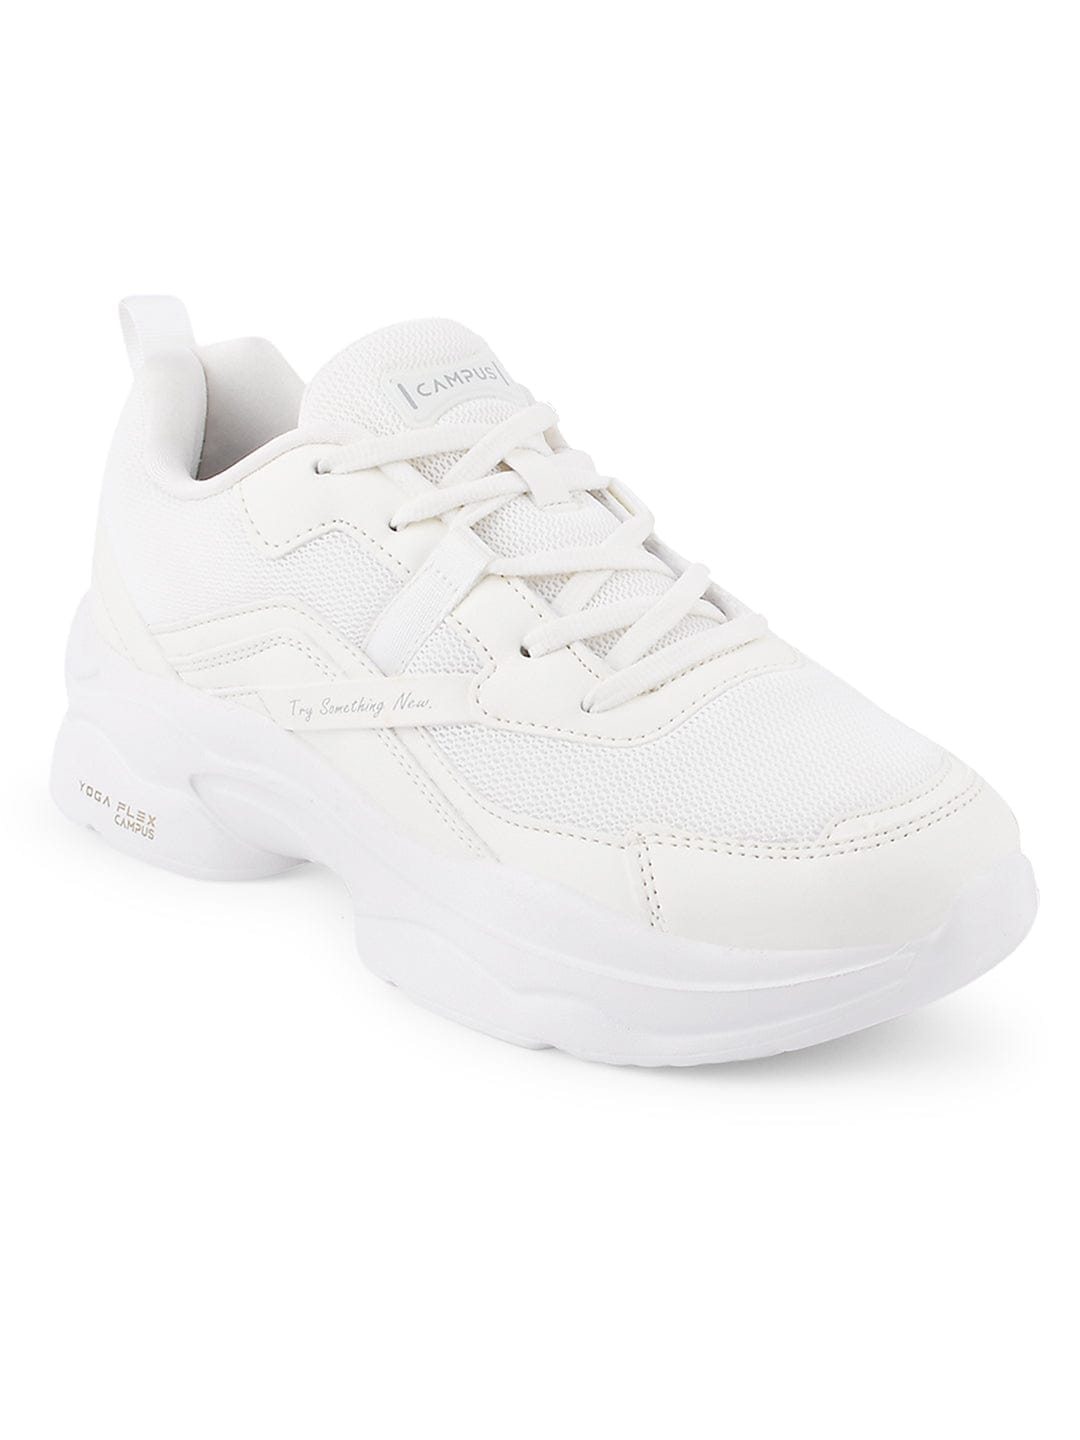 How To Wear White Women Sneakers? 12 Best Outfits Jenta Roman Bring You